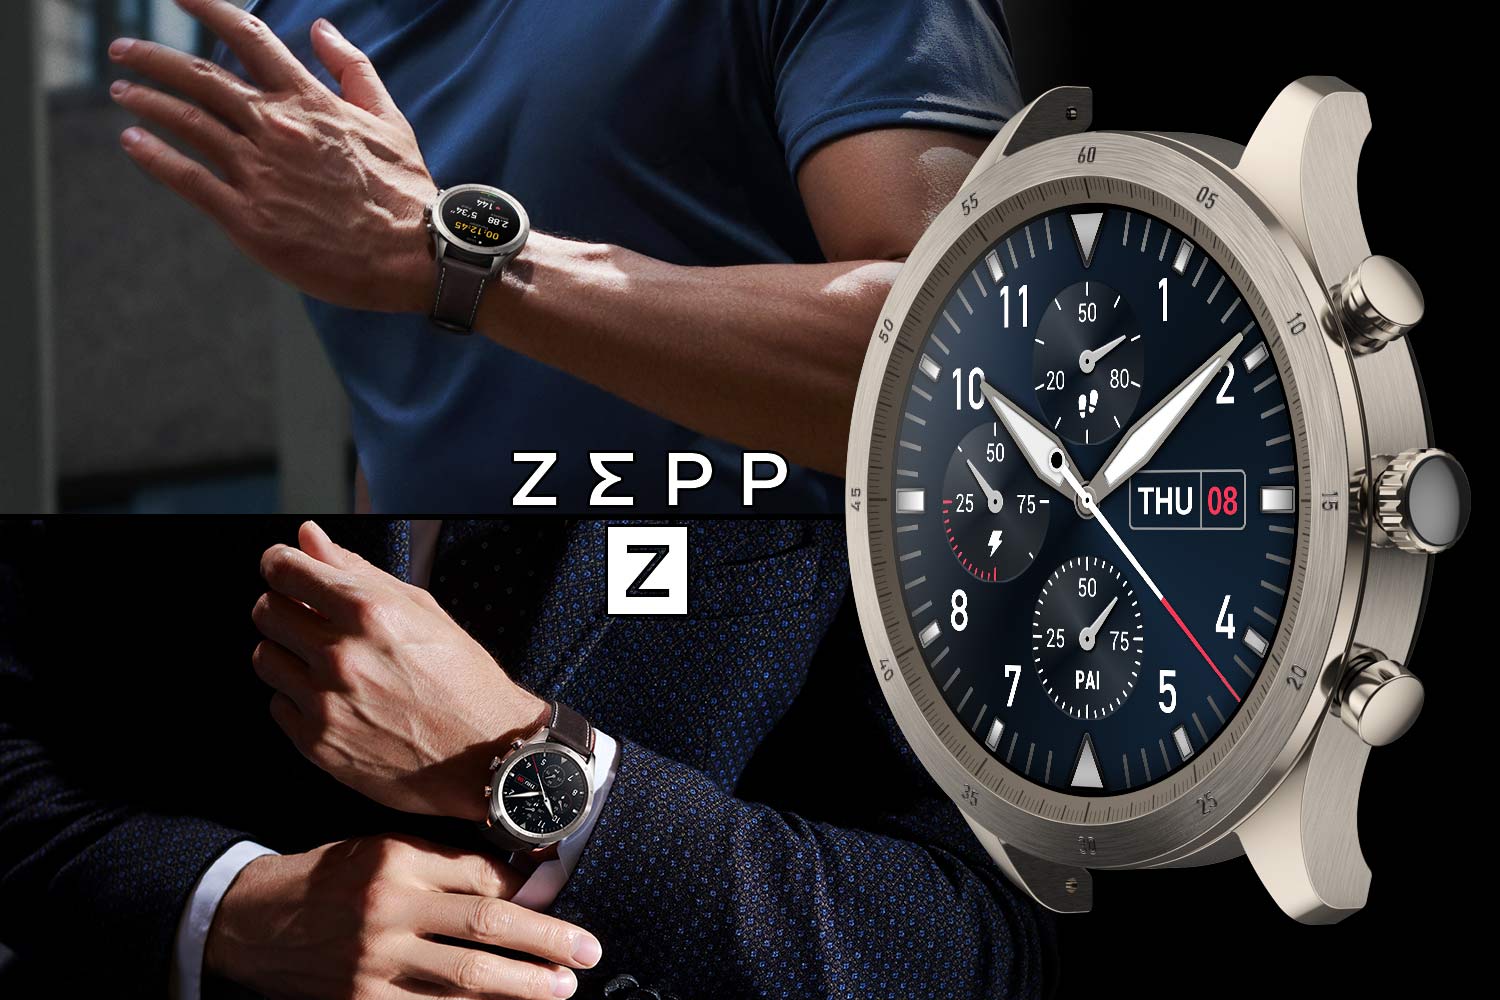 You are currently viewing Zepp Z Smartwatch Review